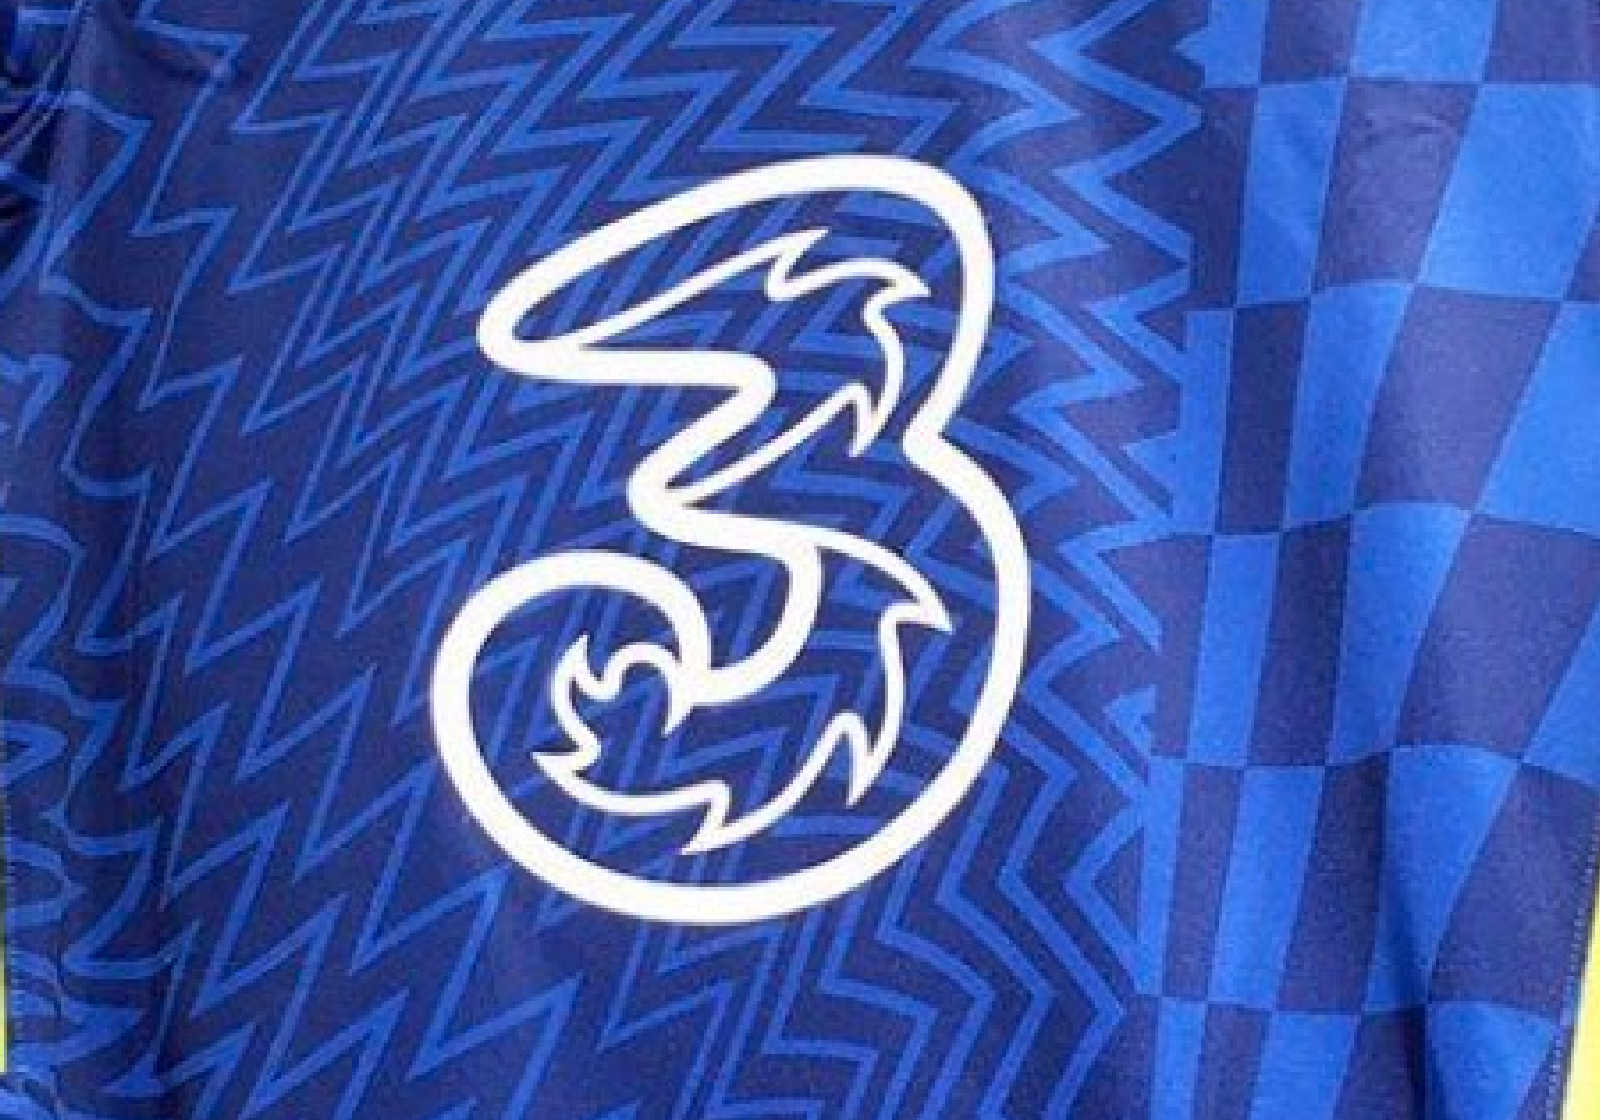 Chelsea home kit for 21/22 season marred with ‘horrible patterns’ as new image surfaces online